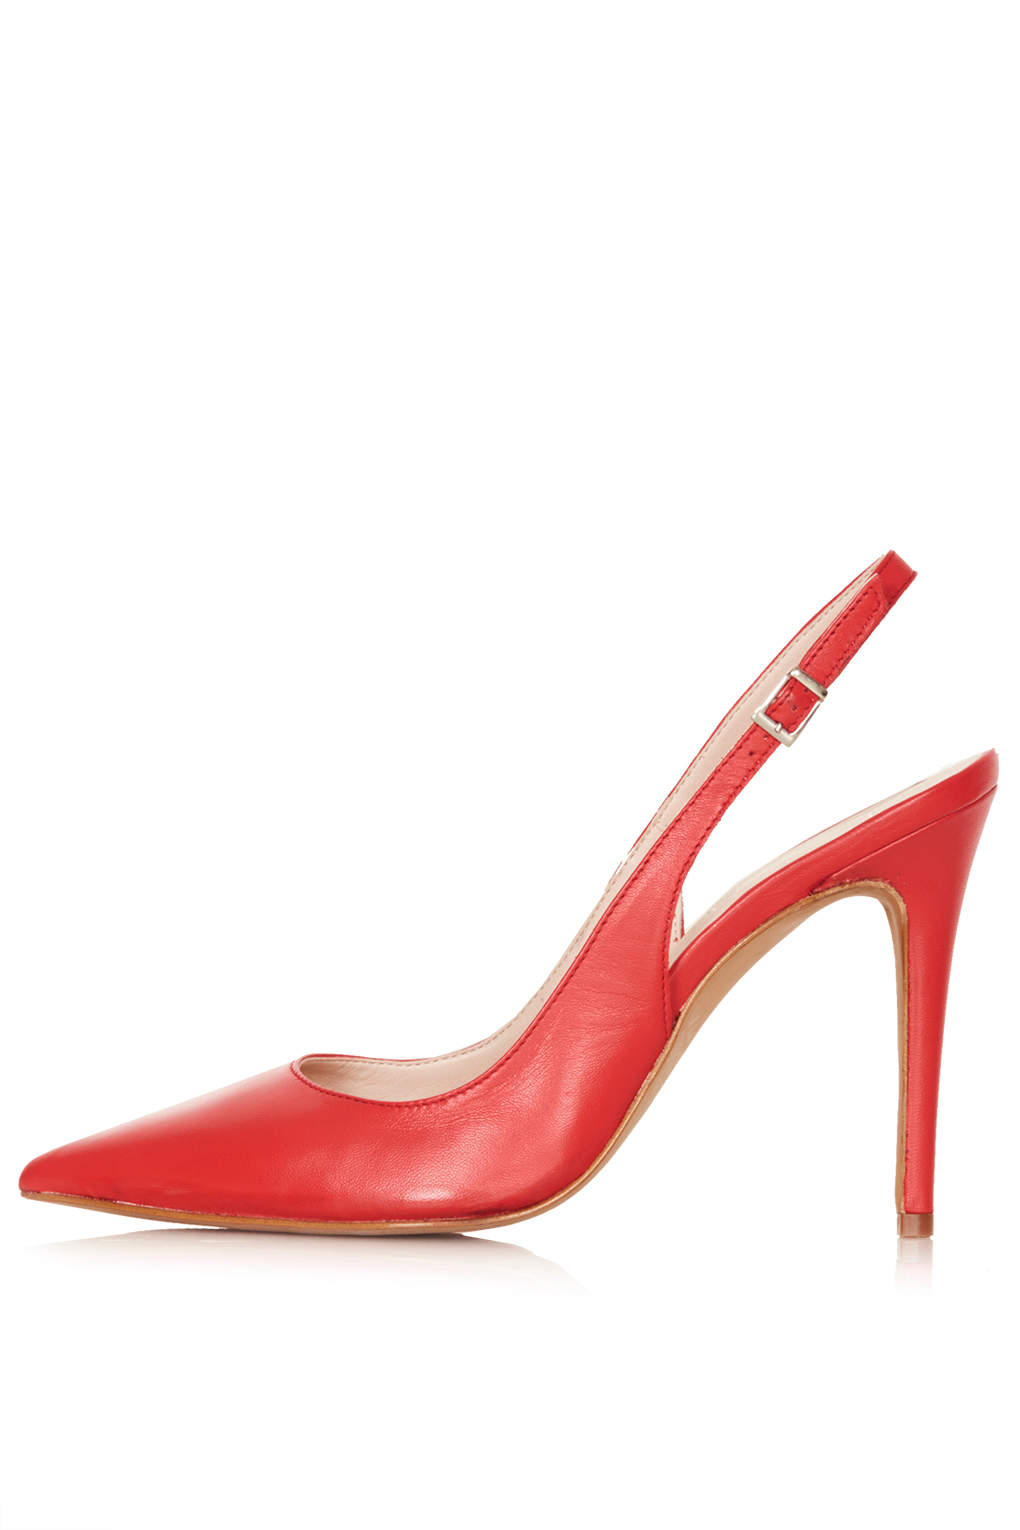 TOPSHOP Gecko Red Leather Court Shoes - Lyst